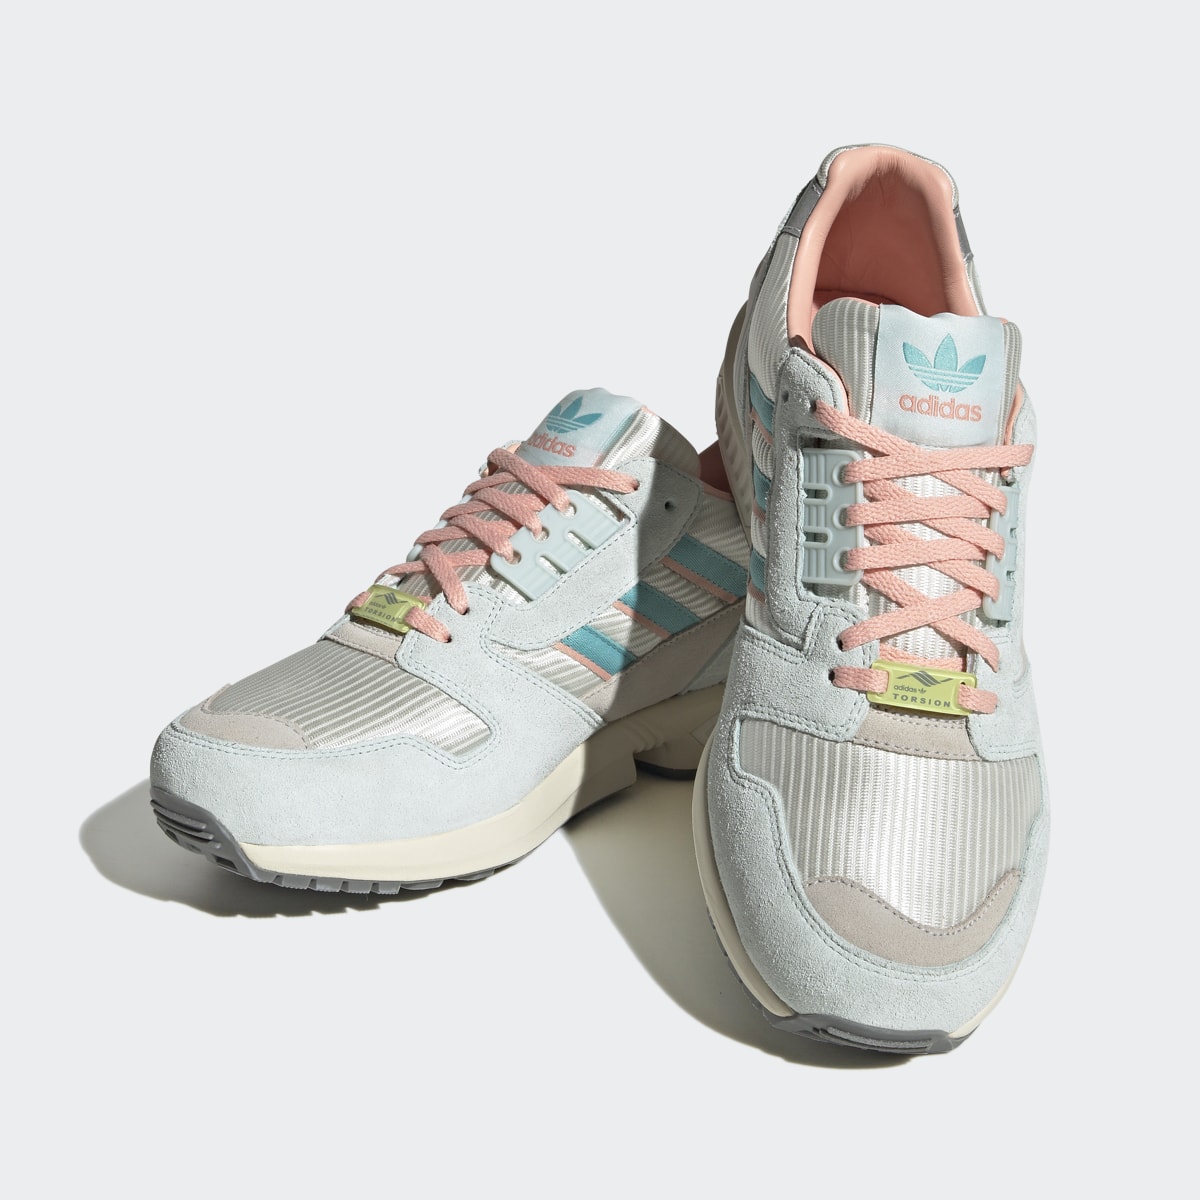 Adidas ZX 8000 Shoes. 5